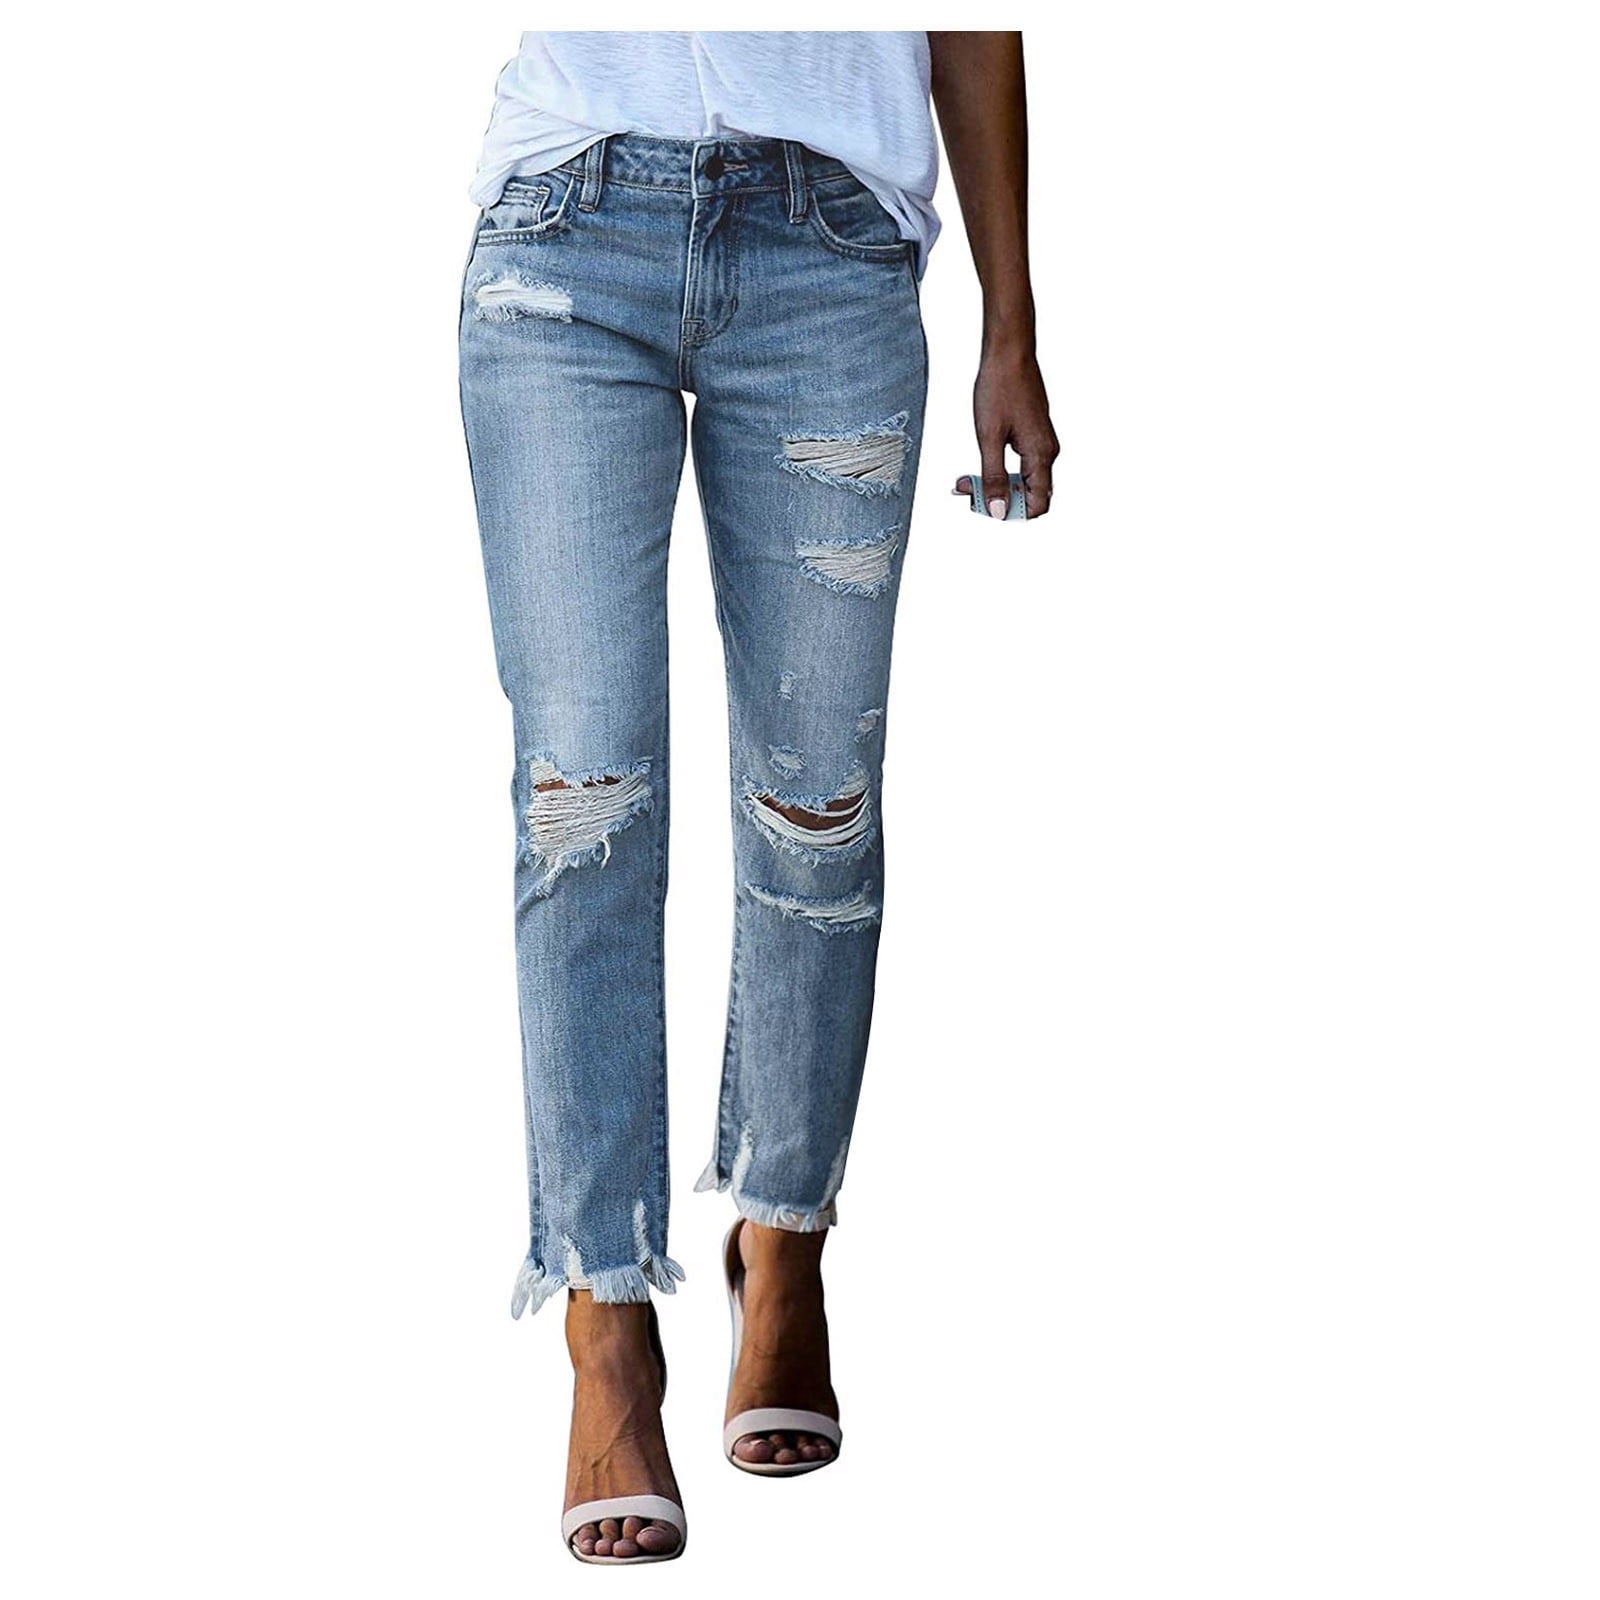 adviicd Straight Jeans Women Stretch Wide Leg Jeans for Women Stretchy ...